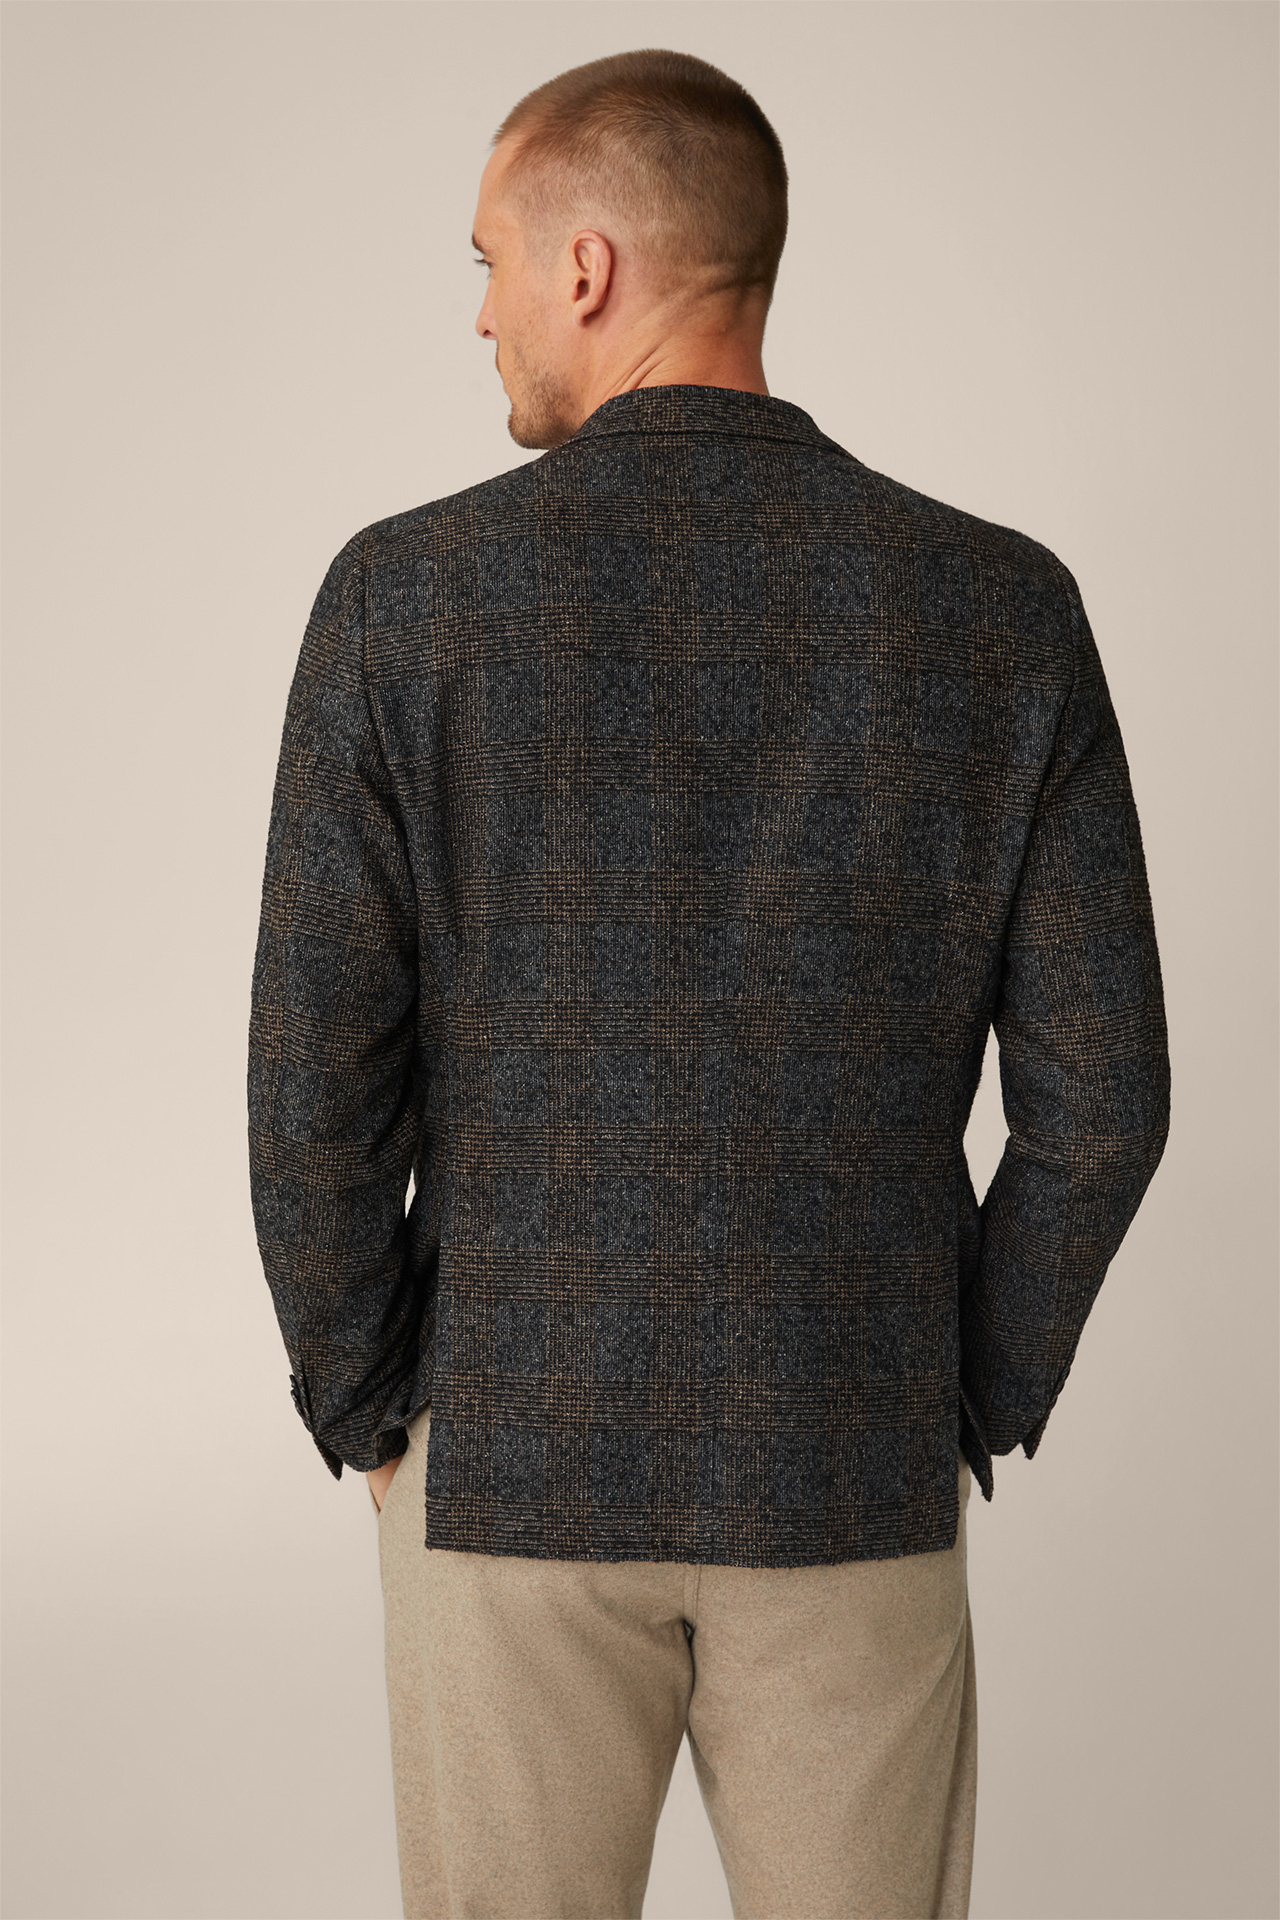  Giro Wool Blend Jacket with Silk in a Black and Brown Pattern